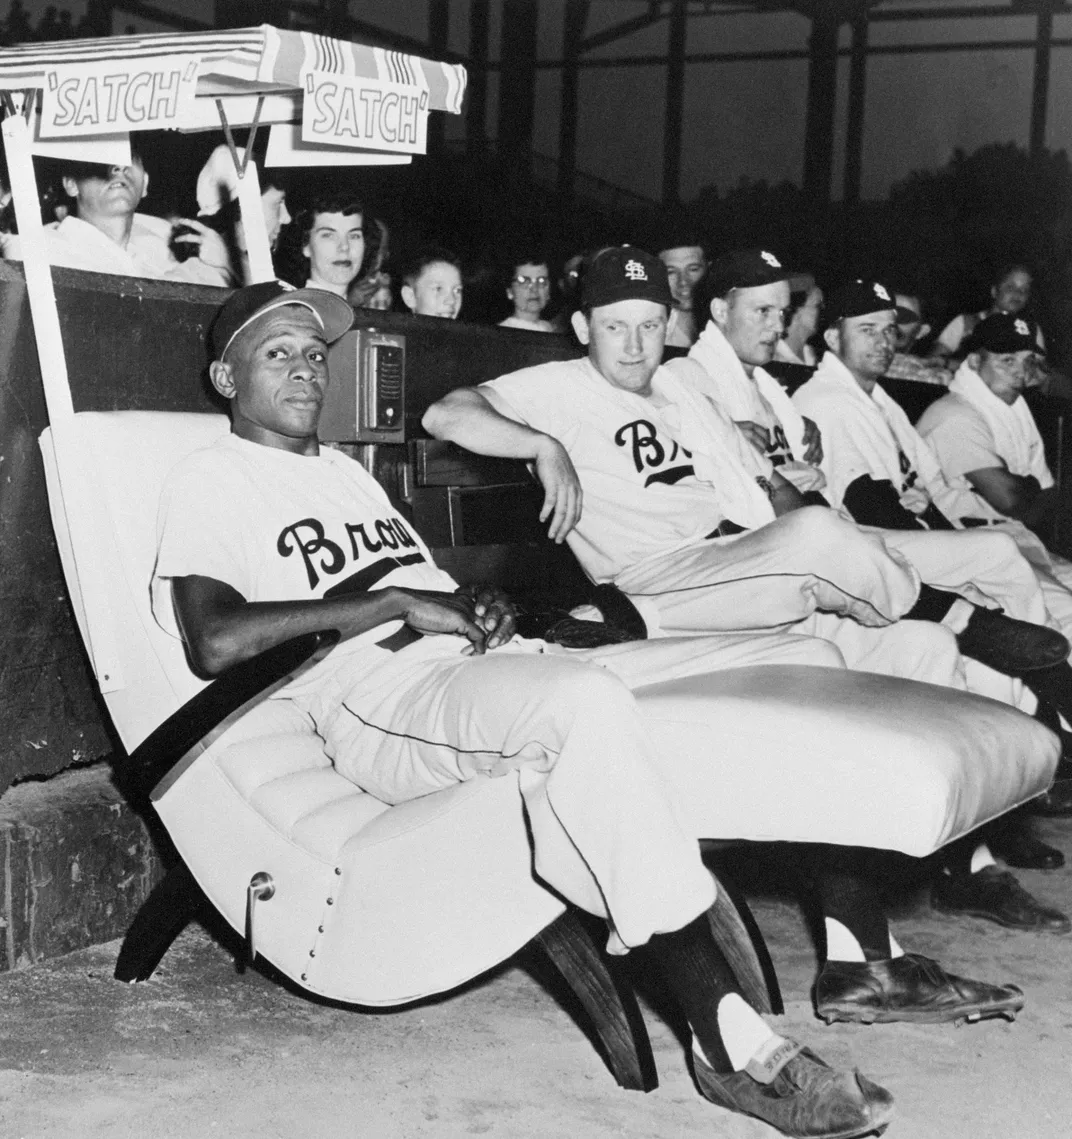 Satchel Paige sits in an easy chair